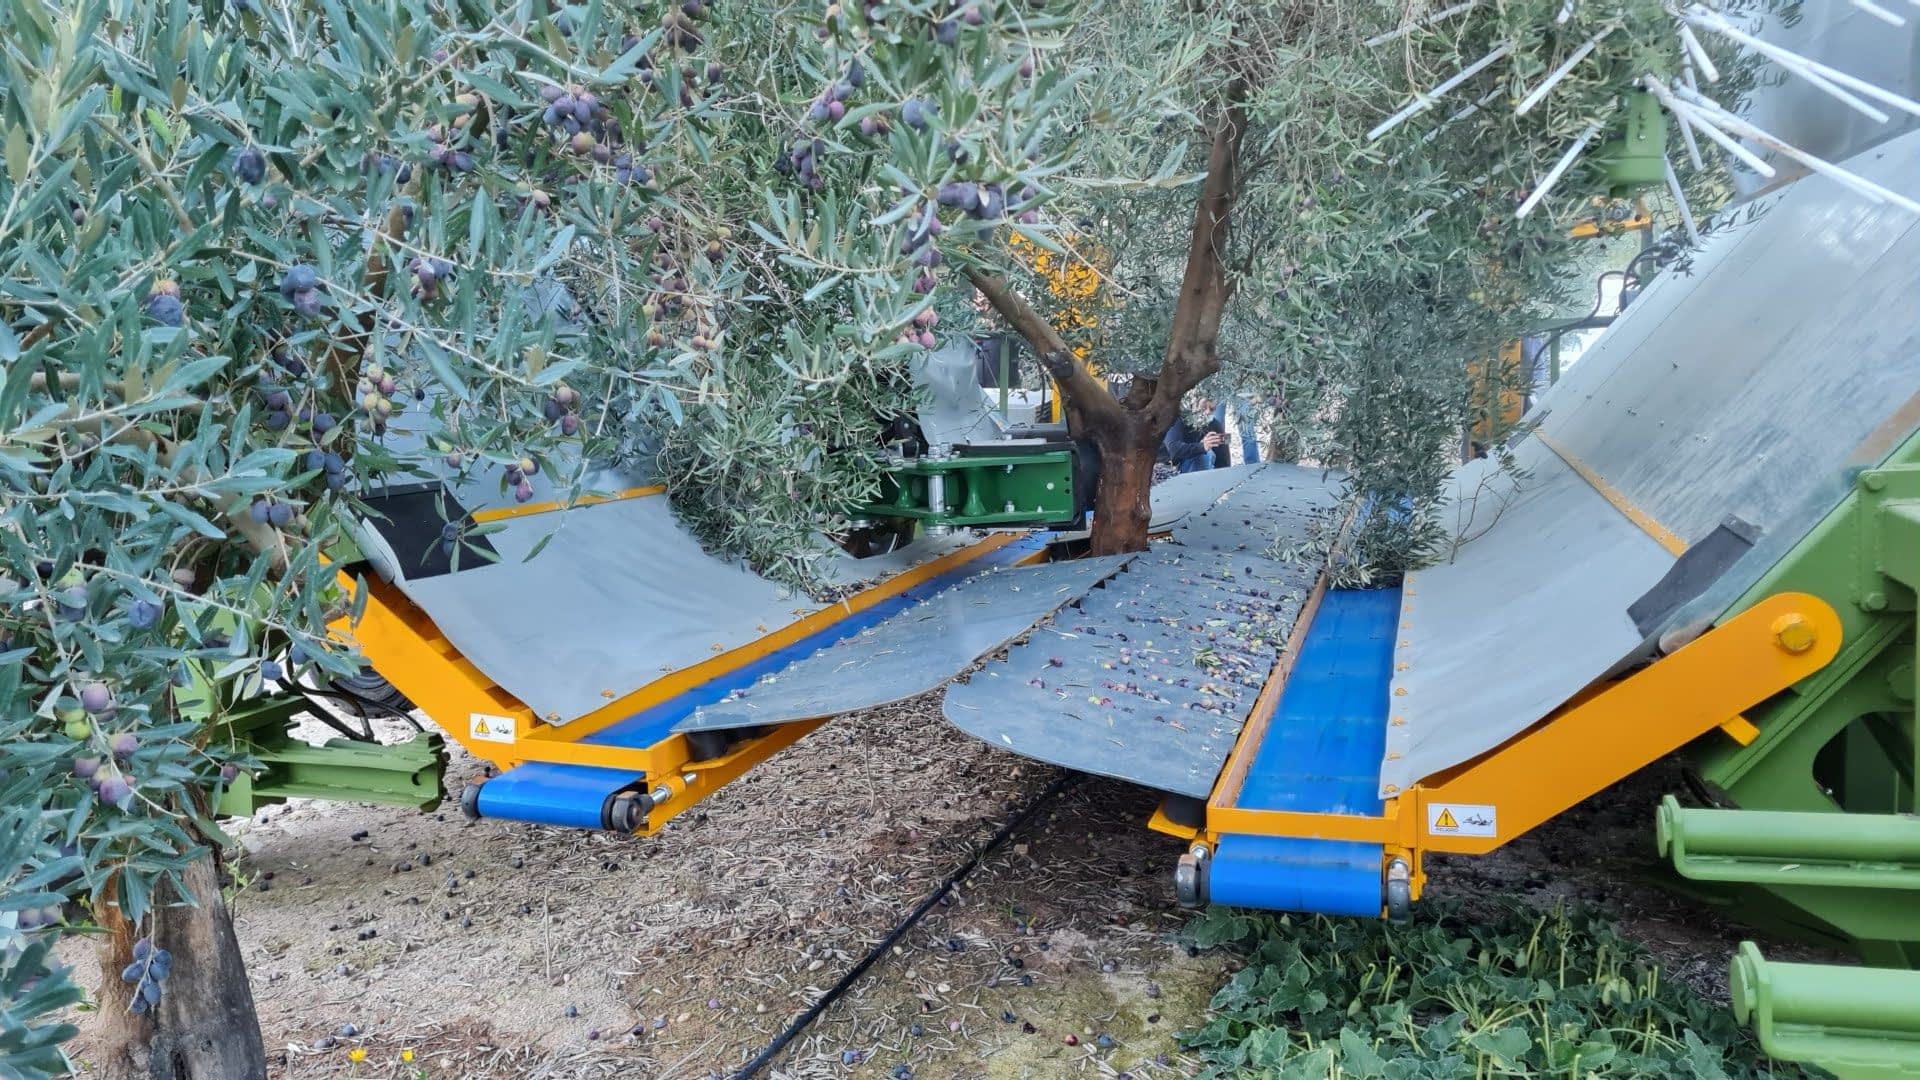 production-business-europe-researchers-unveil-the-latest-technologies-to-help-harvest-and-produce-olive-oil-olive-oil-times